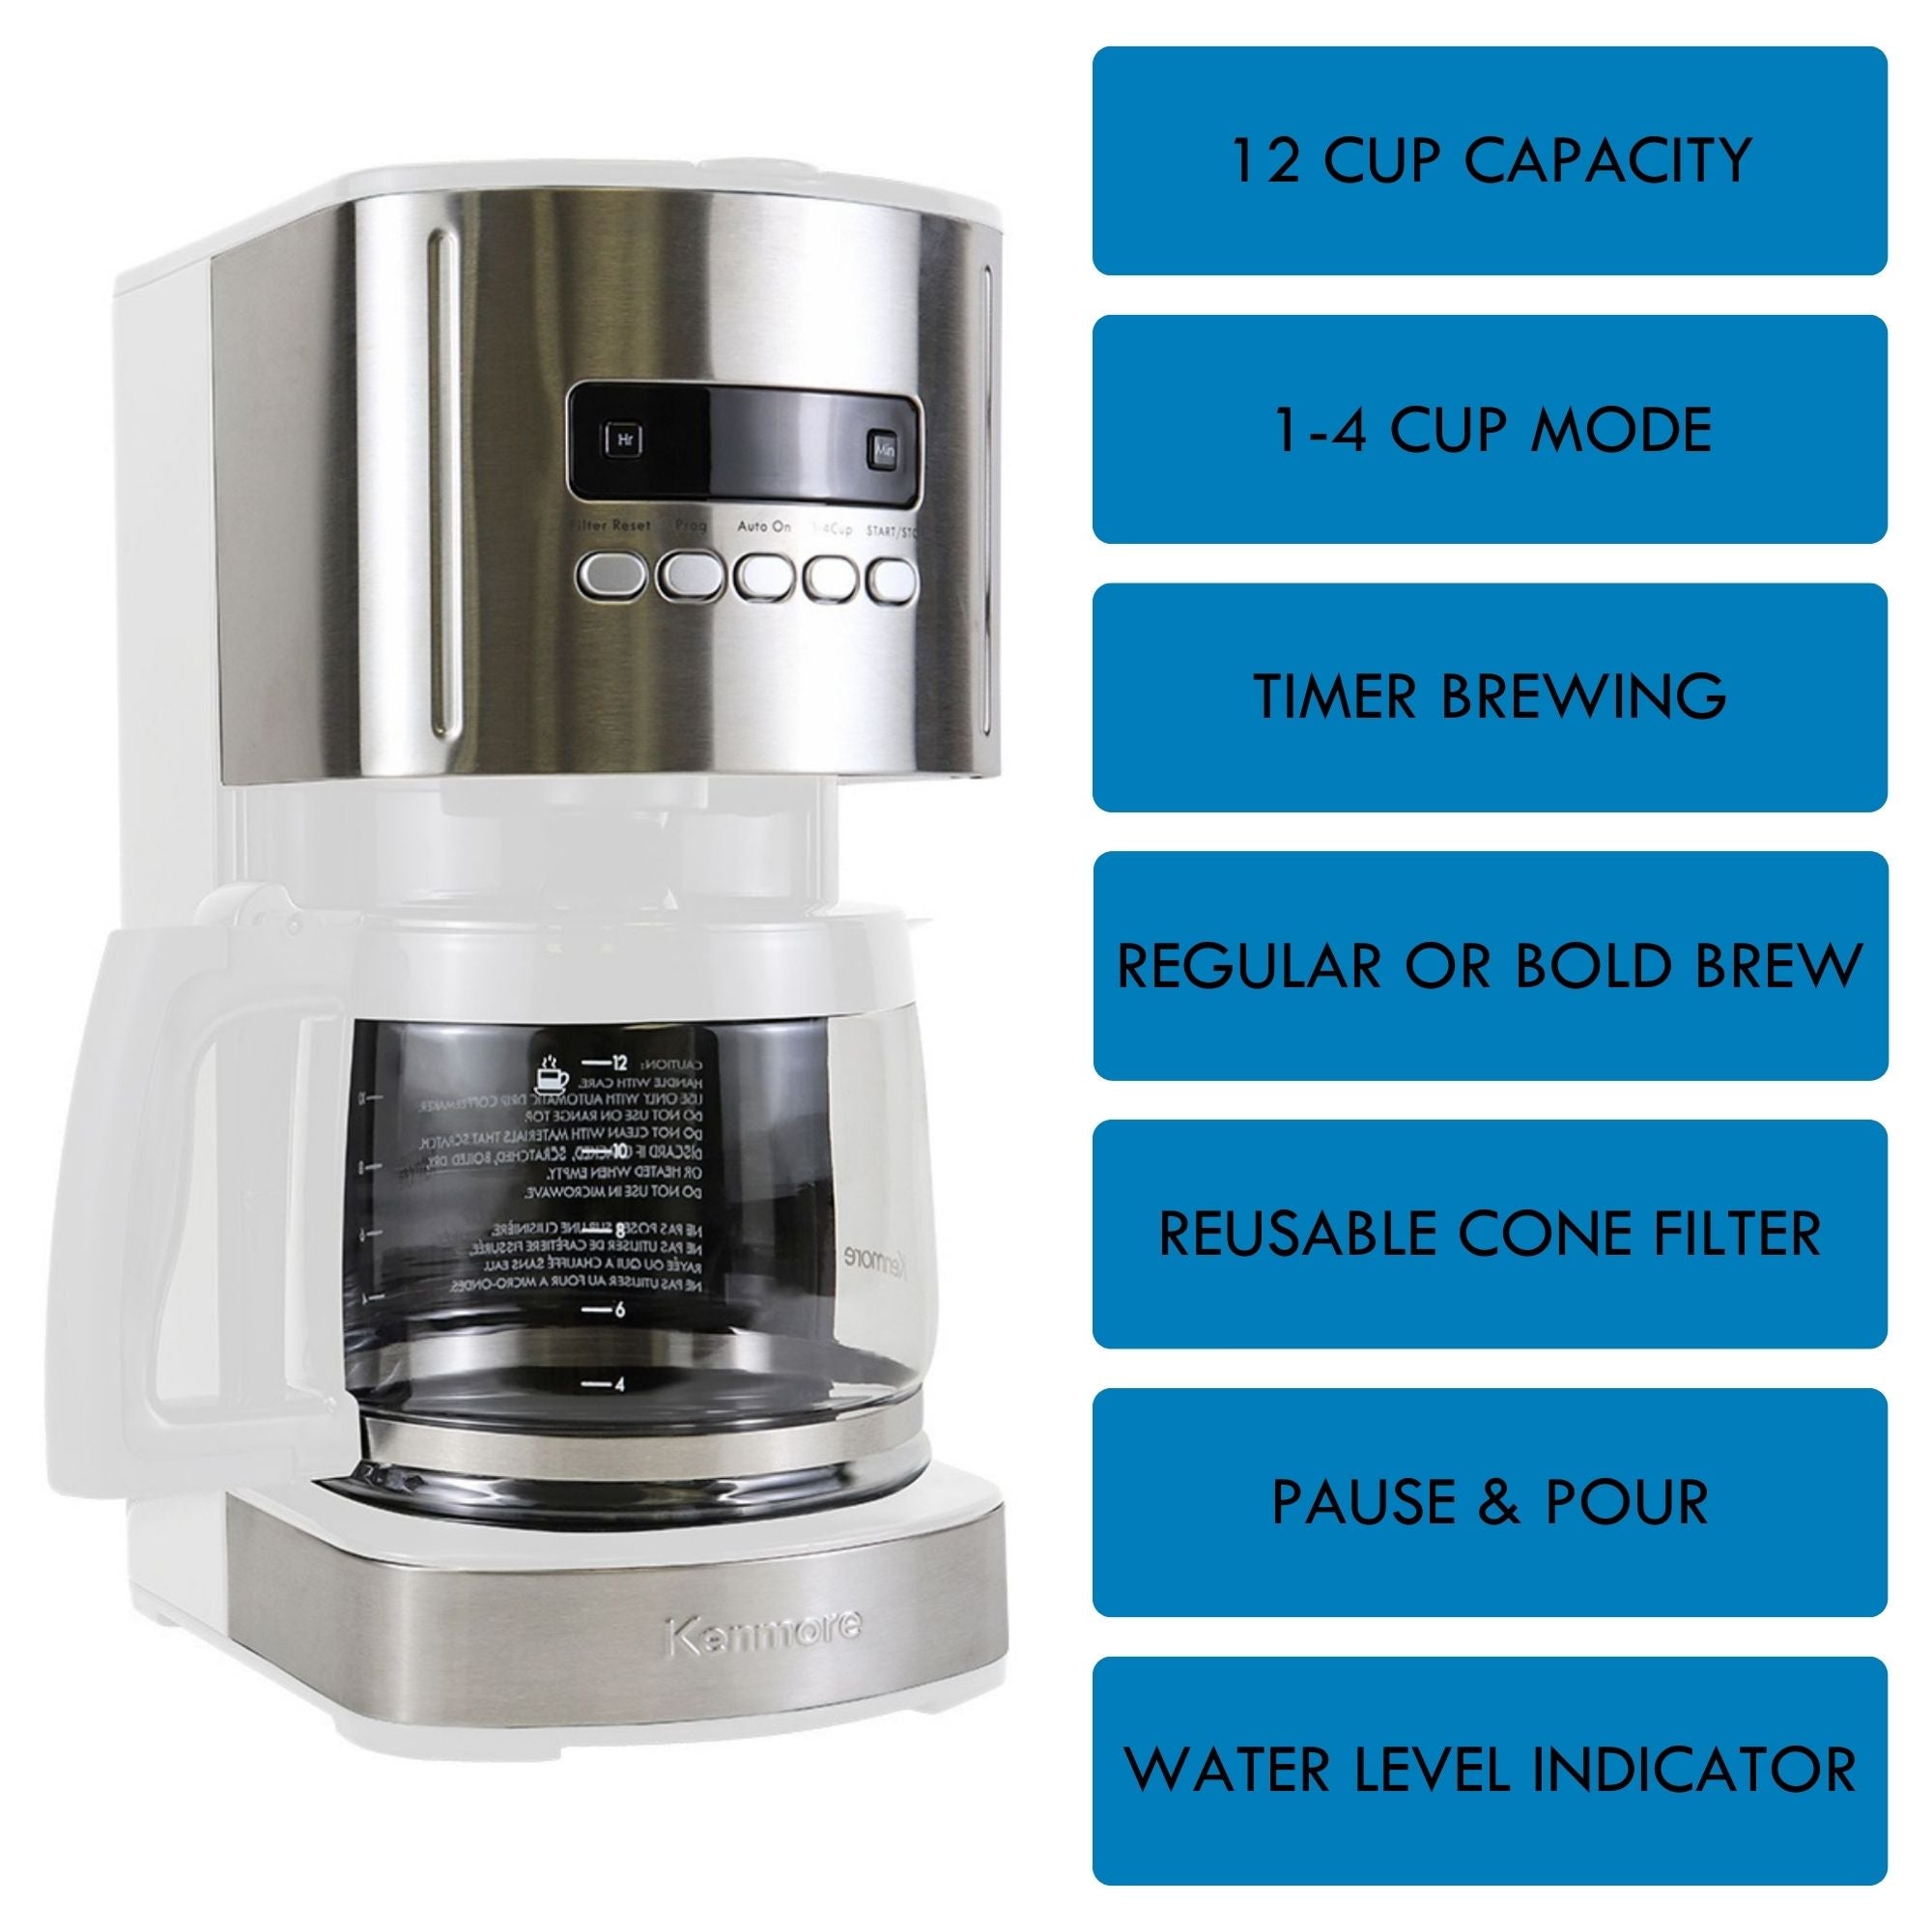 Kenmore 12 cup programmable coffeemaker on a white background on the left with a list of features to the right: 12 cup capacity; 1-4 cup mode; programmable timer; regular or bold brew; reusable cone filter; pause and pour; water level indicator